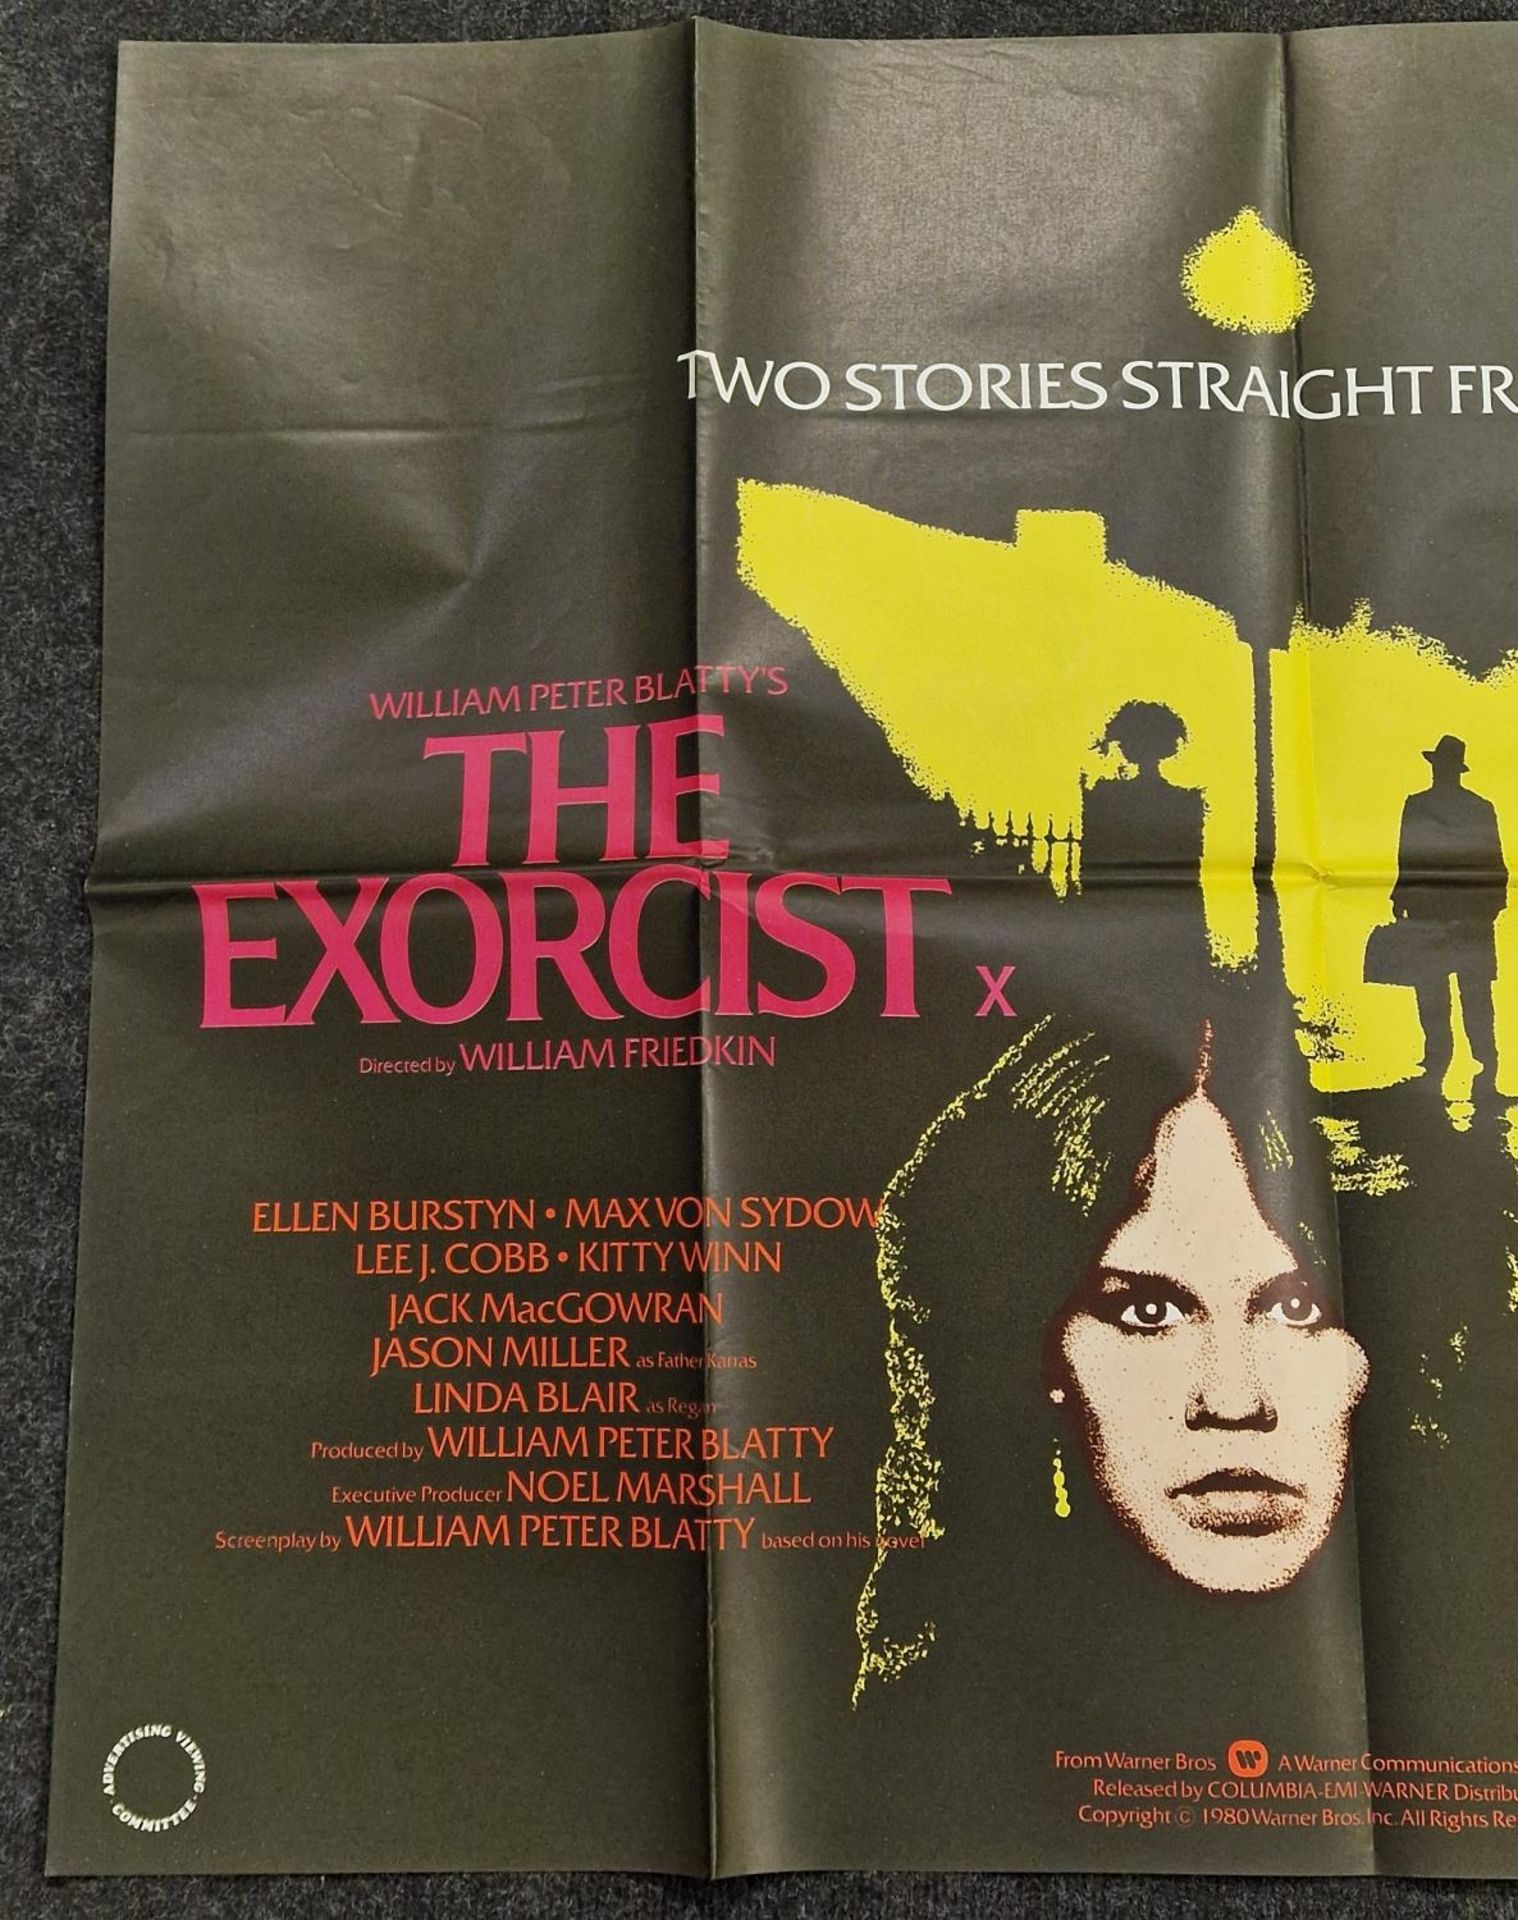 "The Exorcist and Exorcist II The Heretic" original vintage folded quad film poster 1980 starring - Image 2 of 5